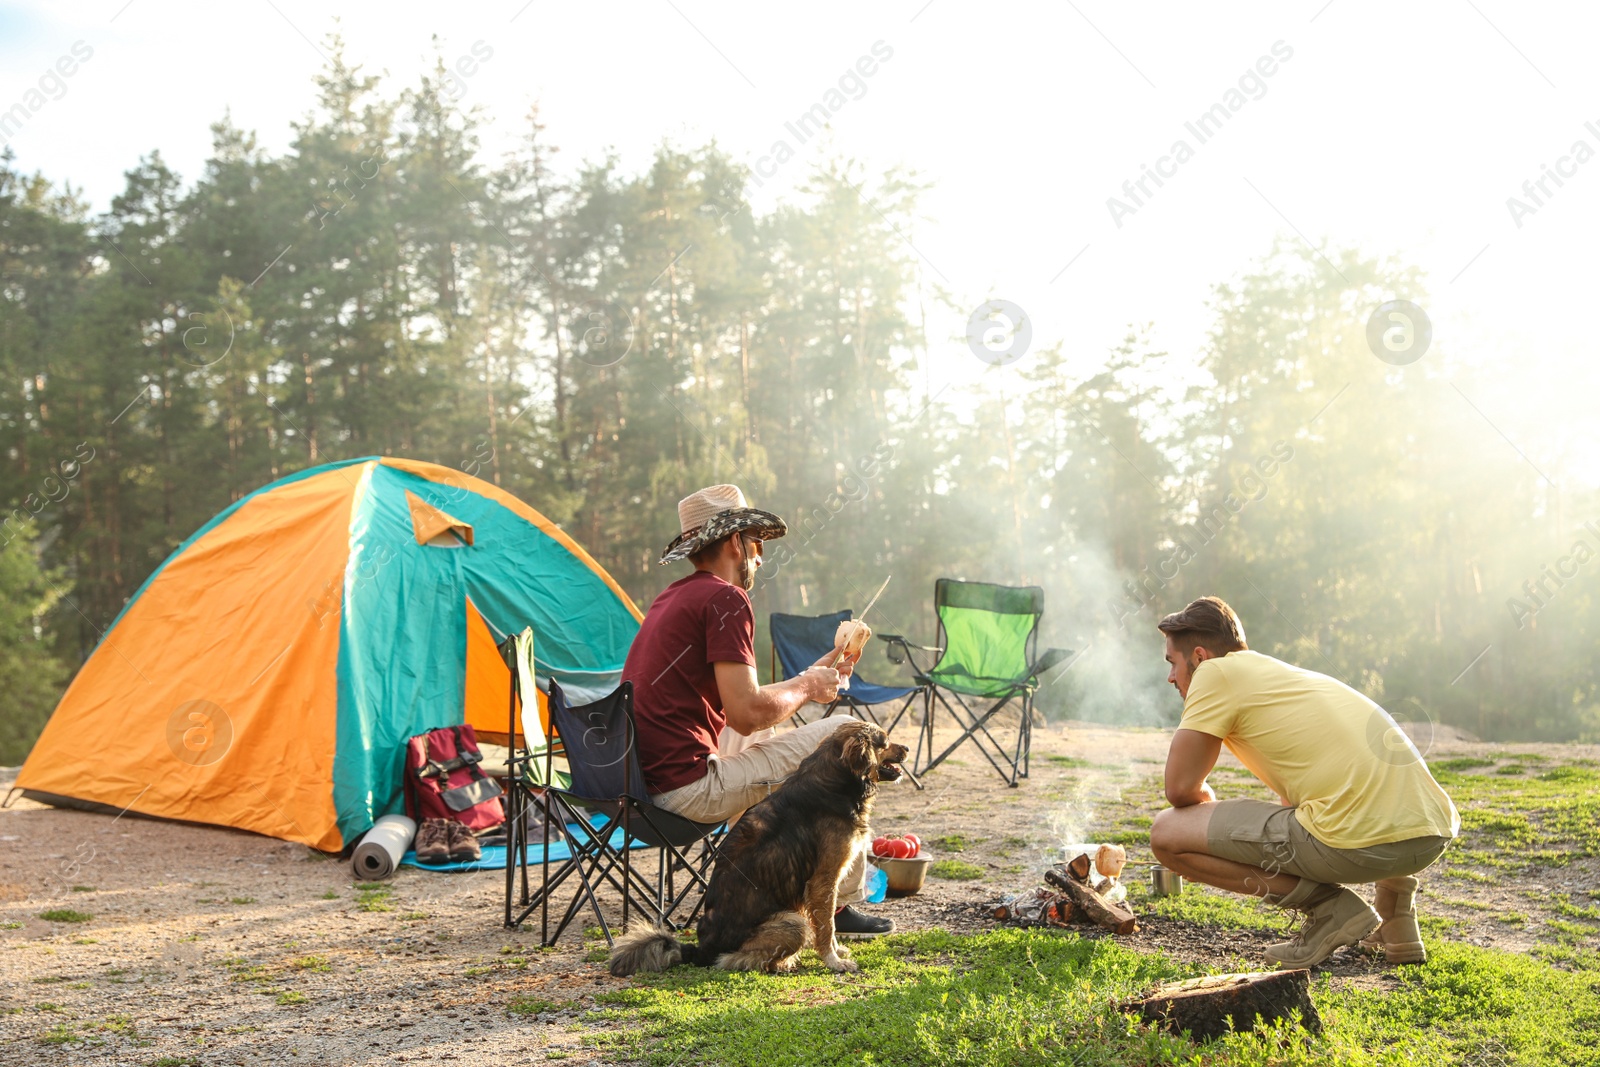 Photo of People cooking on bonfire near camping tent in wilderness